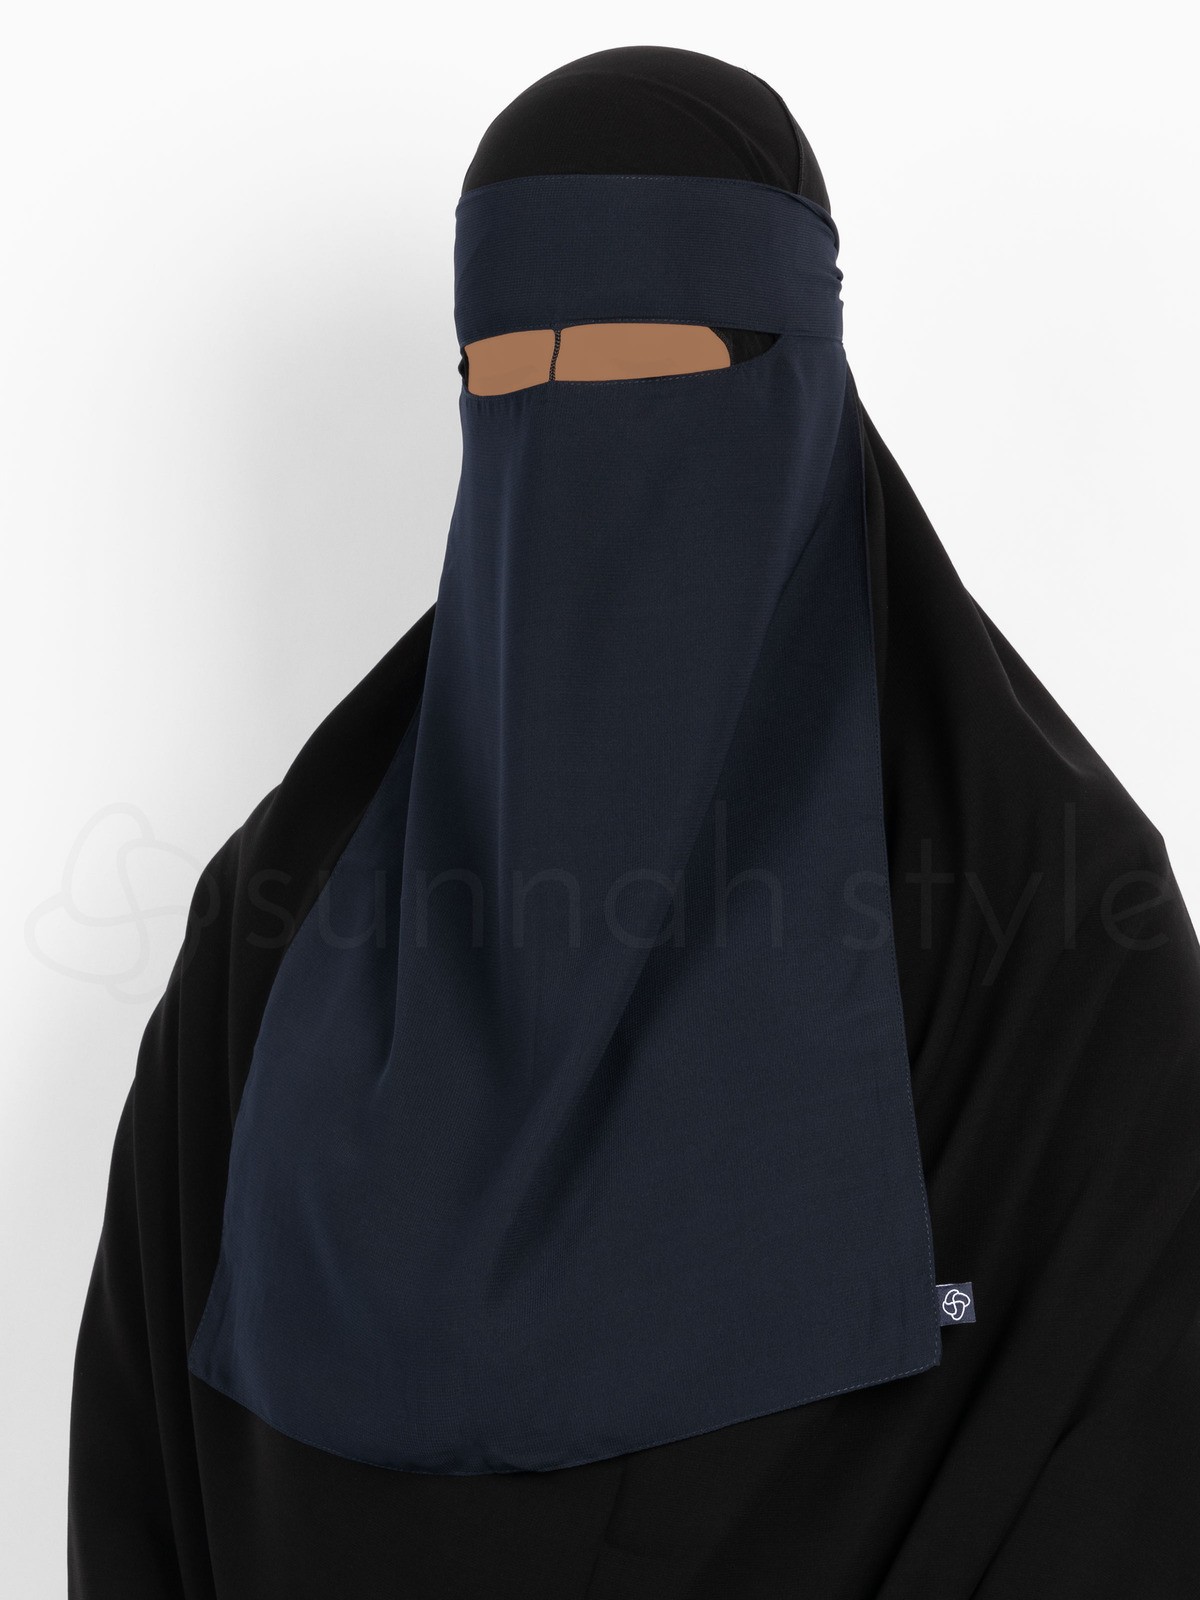 Sunnah Style - One Layer Niqab /w Nose String (Navy Blue)